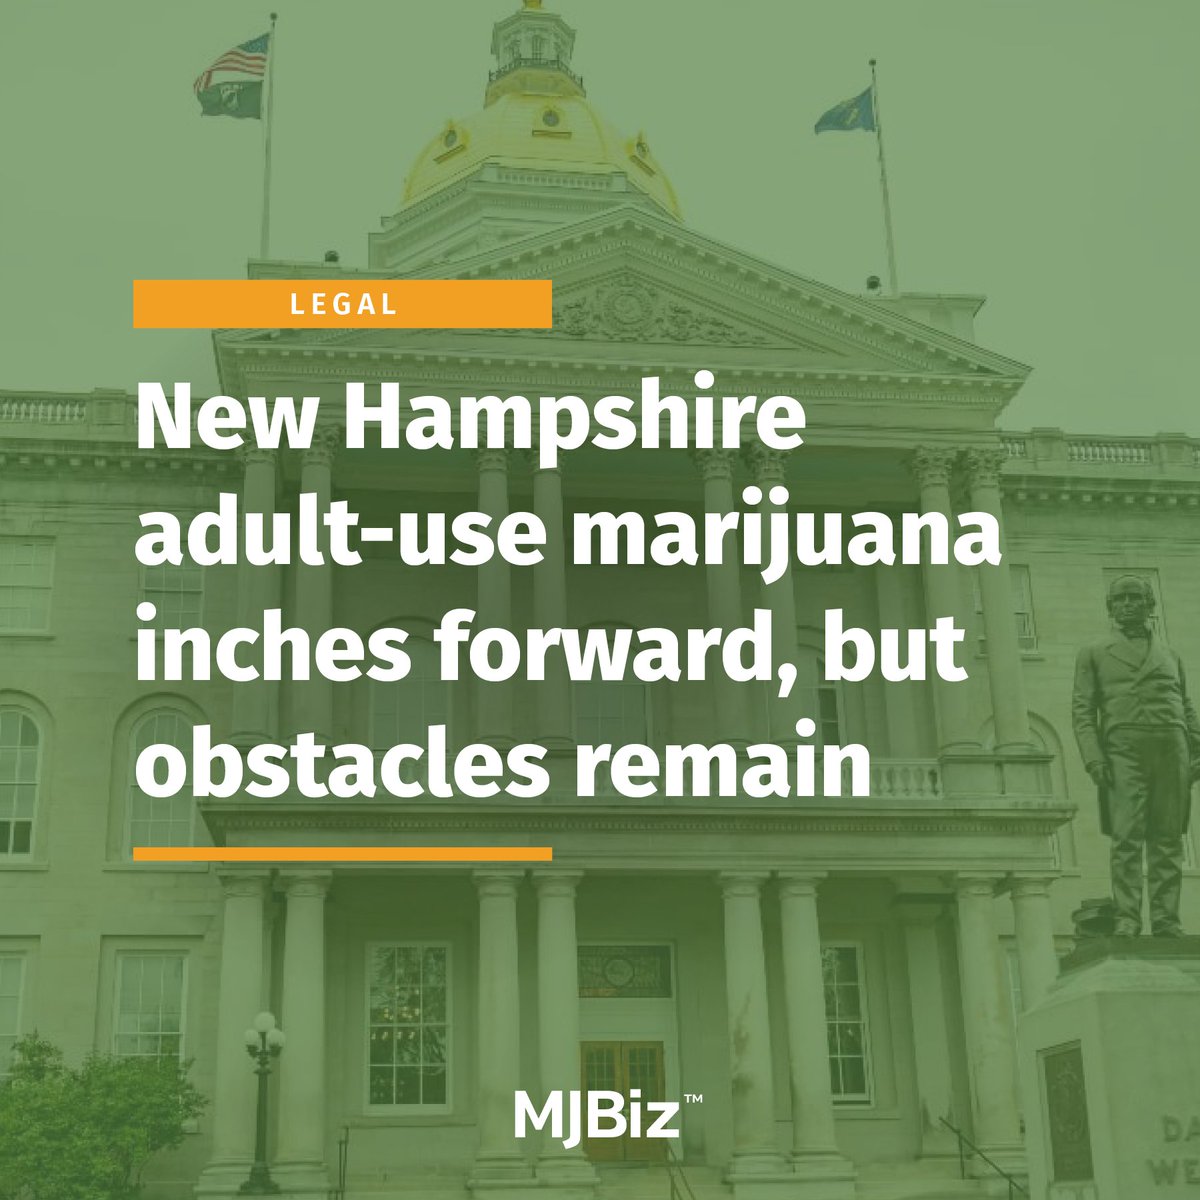 #NewHampshire adult-use #marijuana legalization is inching forward again. More info here: bit.ly/3QF0XxO (Photo by Enrico Della Pietra/stock.adobe.com)